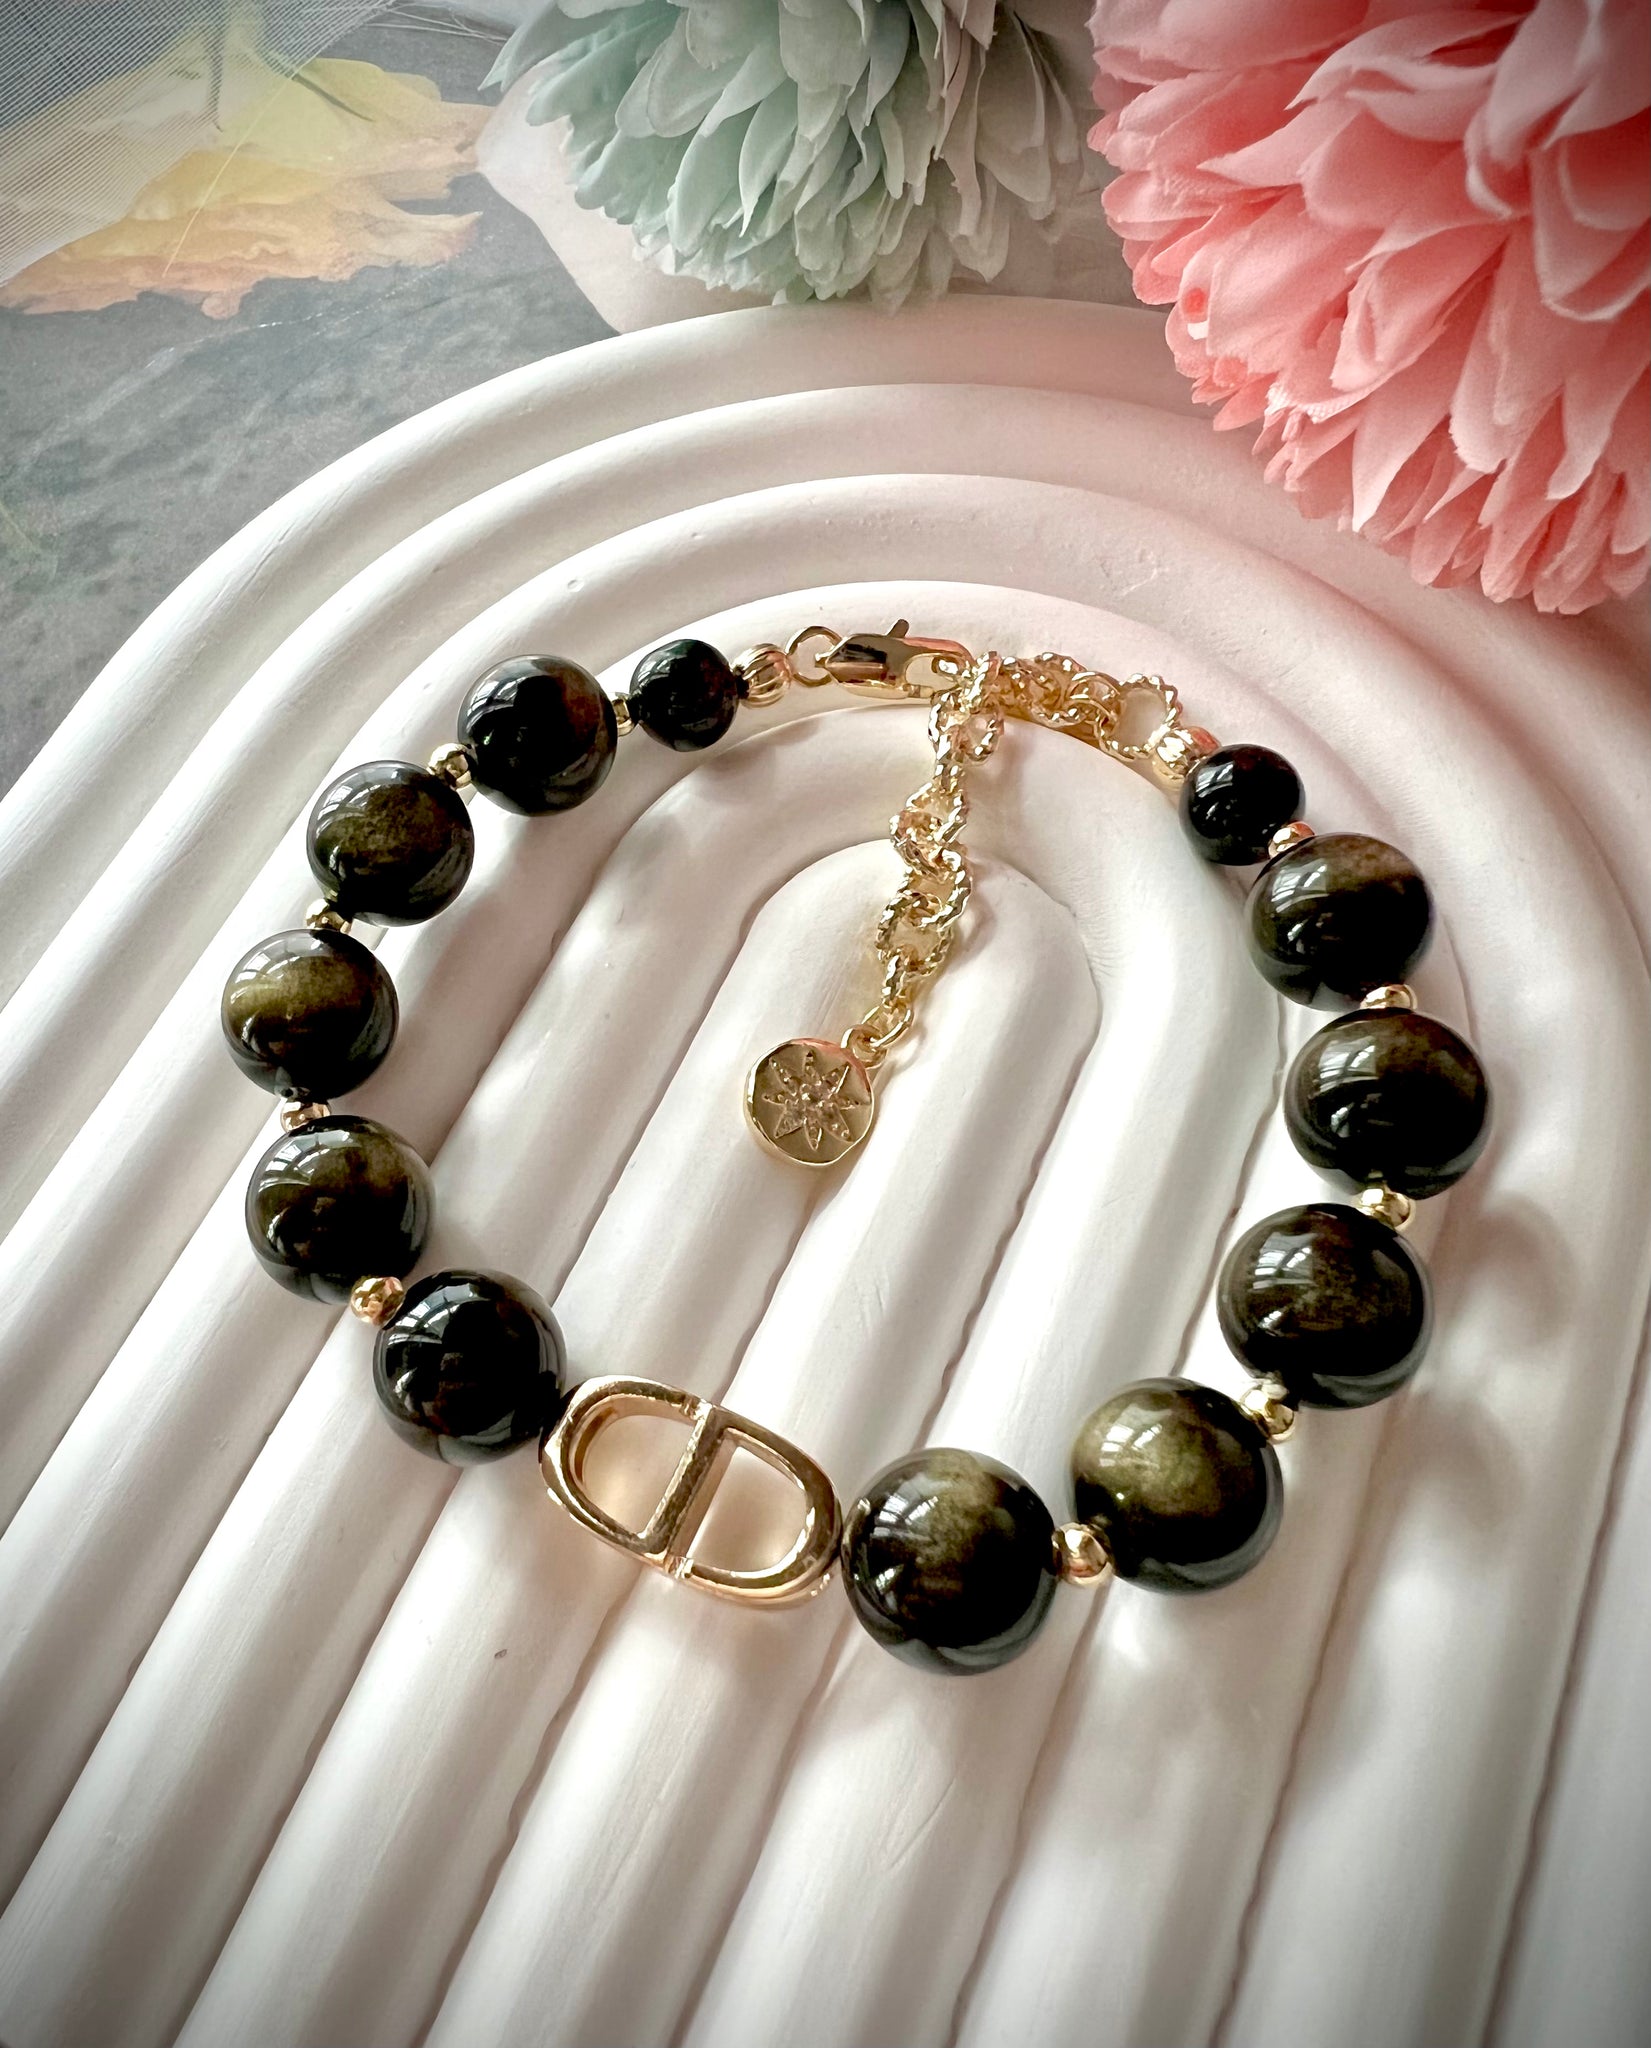 Obsidian Necklace with 24k Gold Plate - Midnight Affair | NOVICA